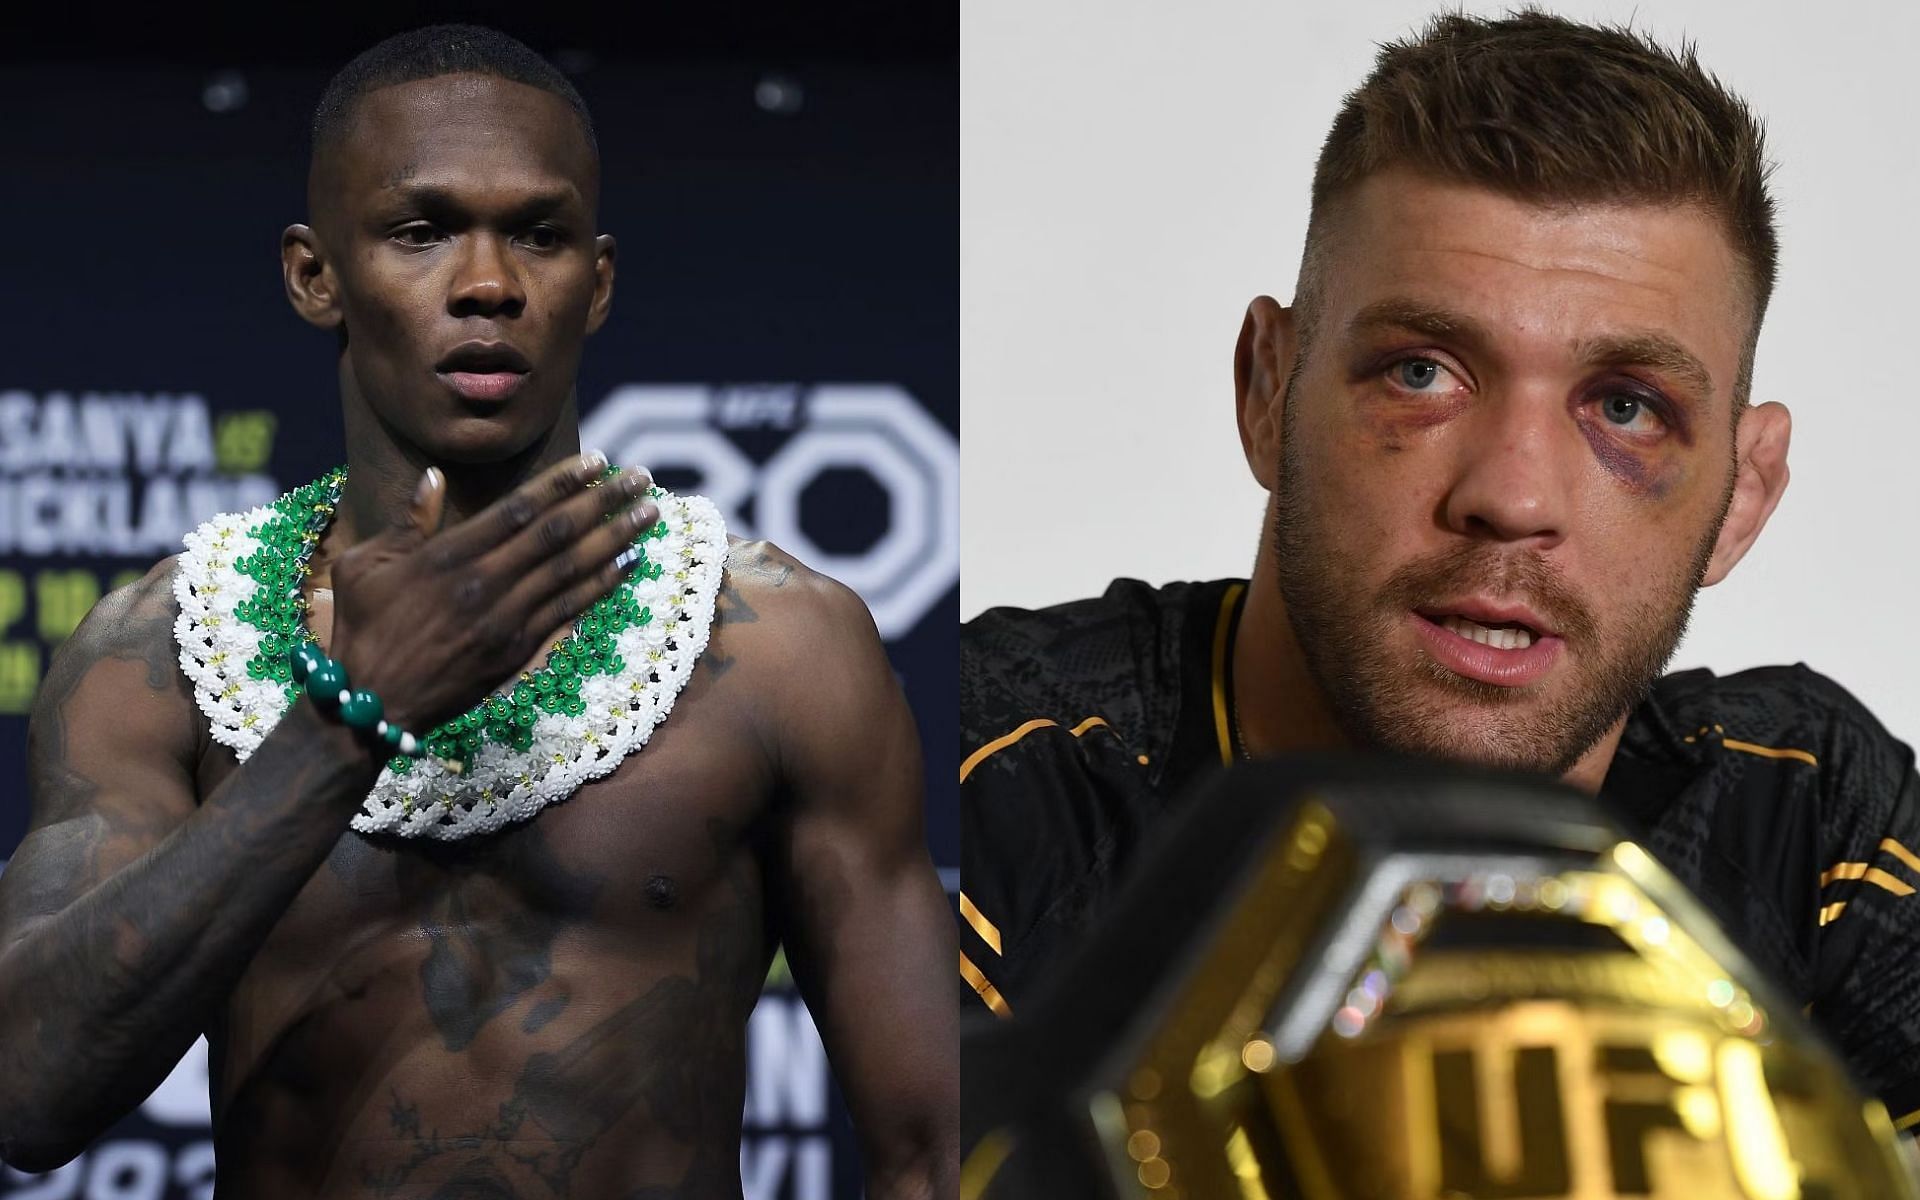 Dricus du Plessis vs. Israel Adesanya mega-fight brewing for down under, hints &ldquo;King of Africa&rdquo; [Image courtesy: Getty Images]